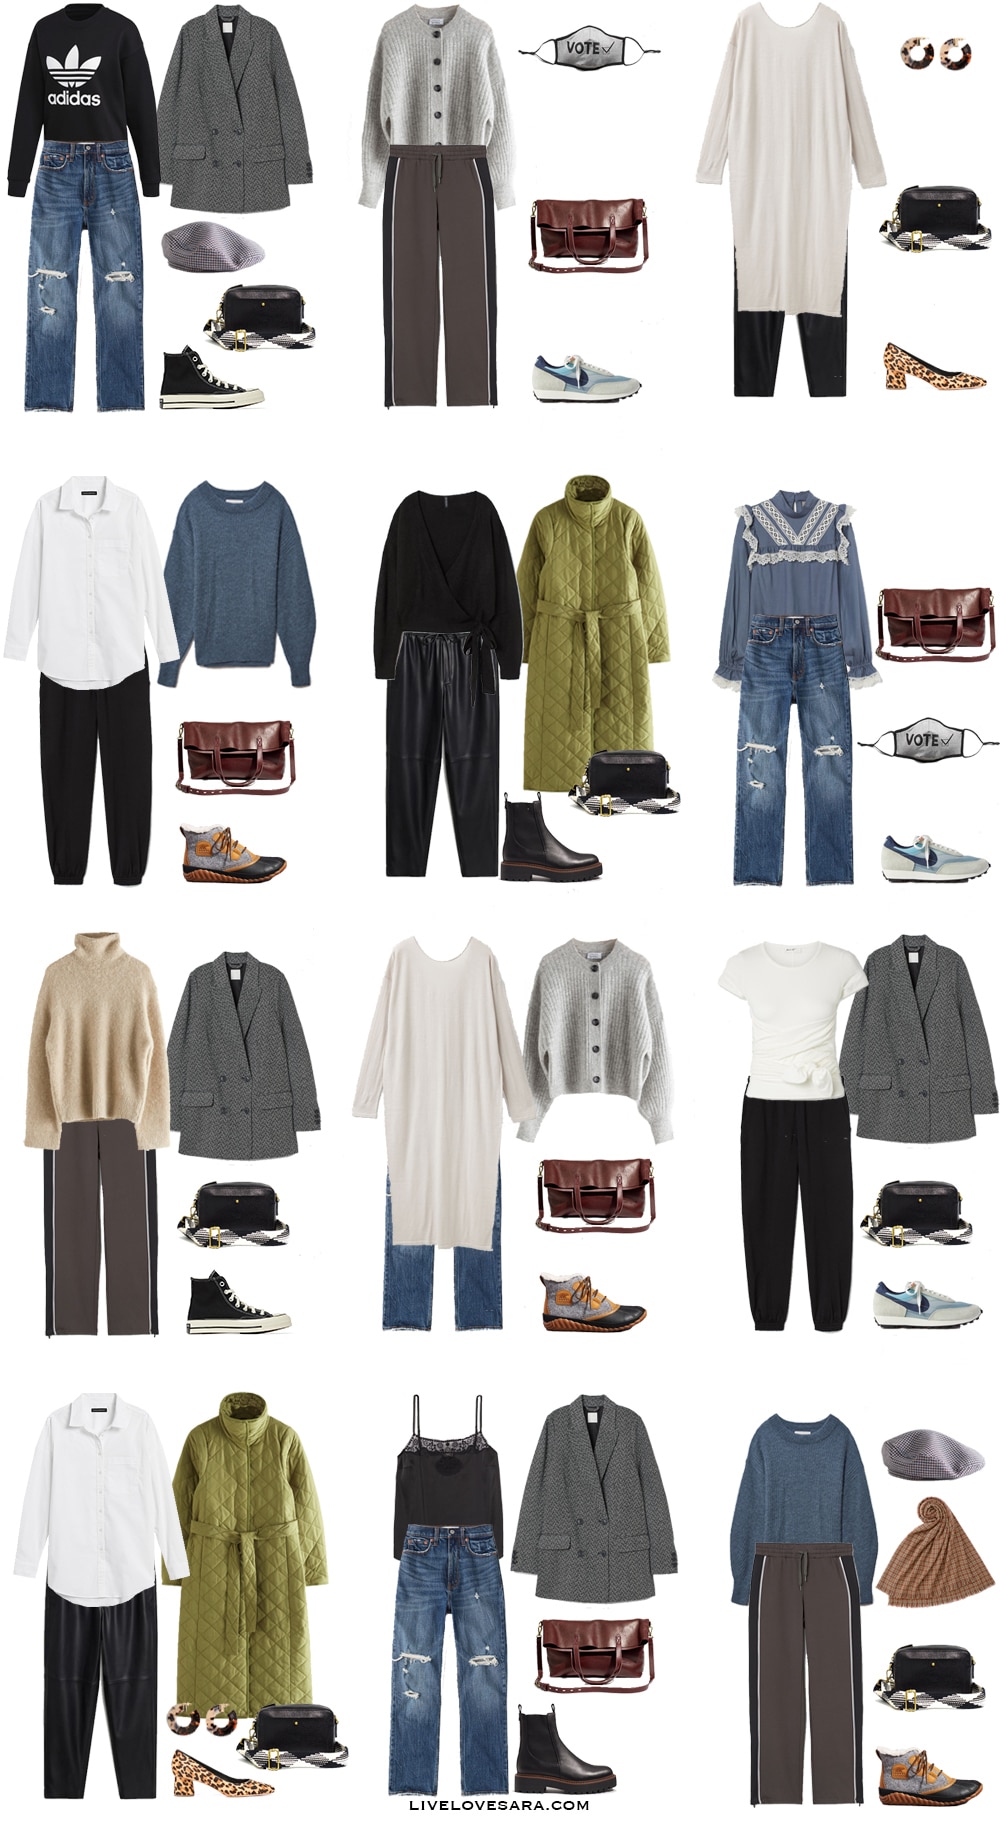 The Casual Fall Capsule Wardrobe Outfits 13-24